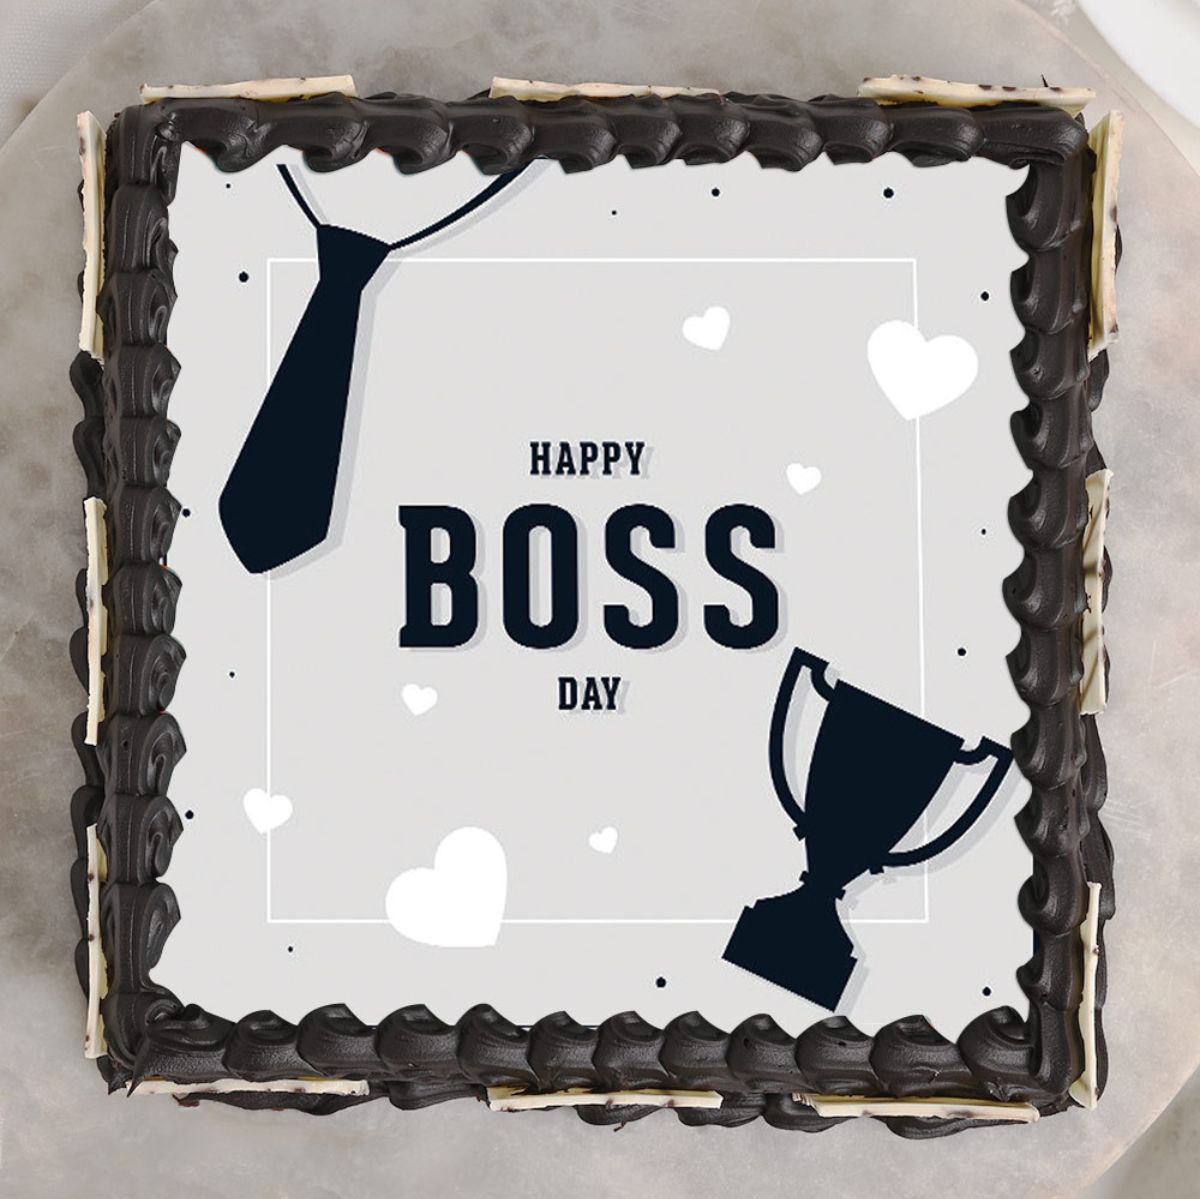 Best Boss Poster Choco Mouse Cake